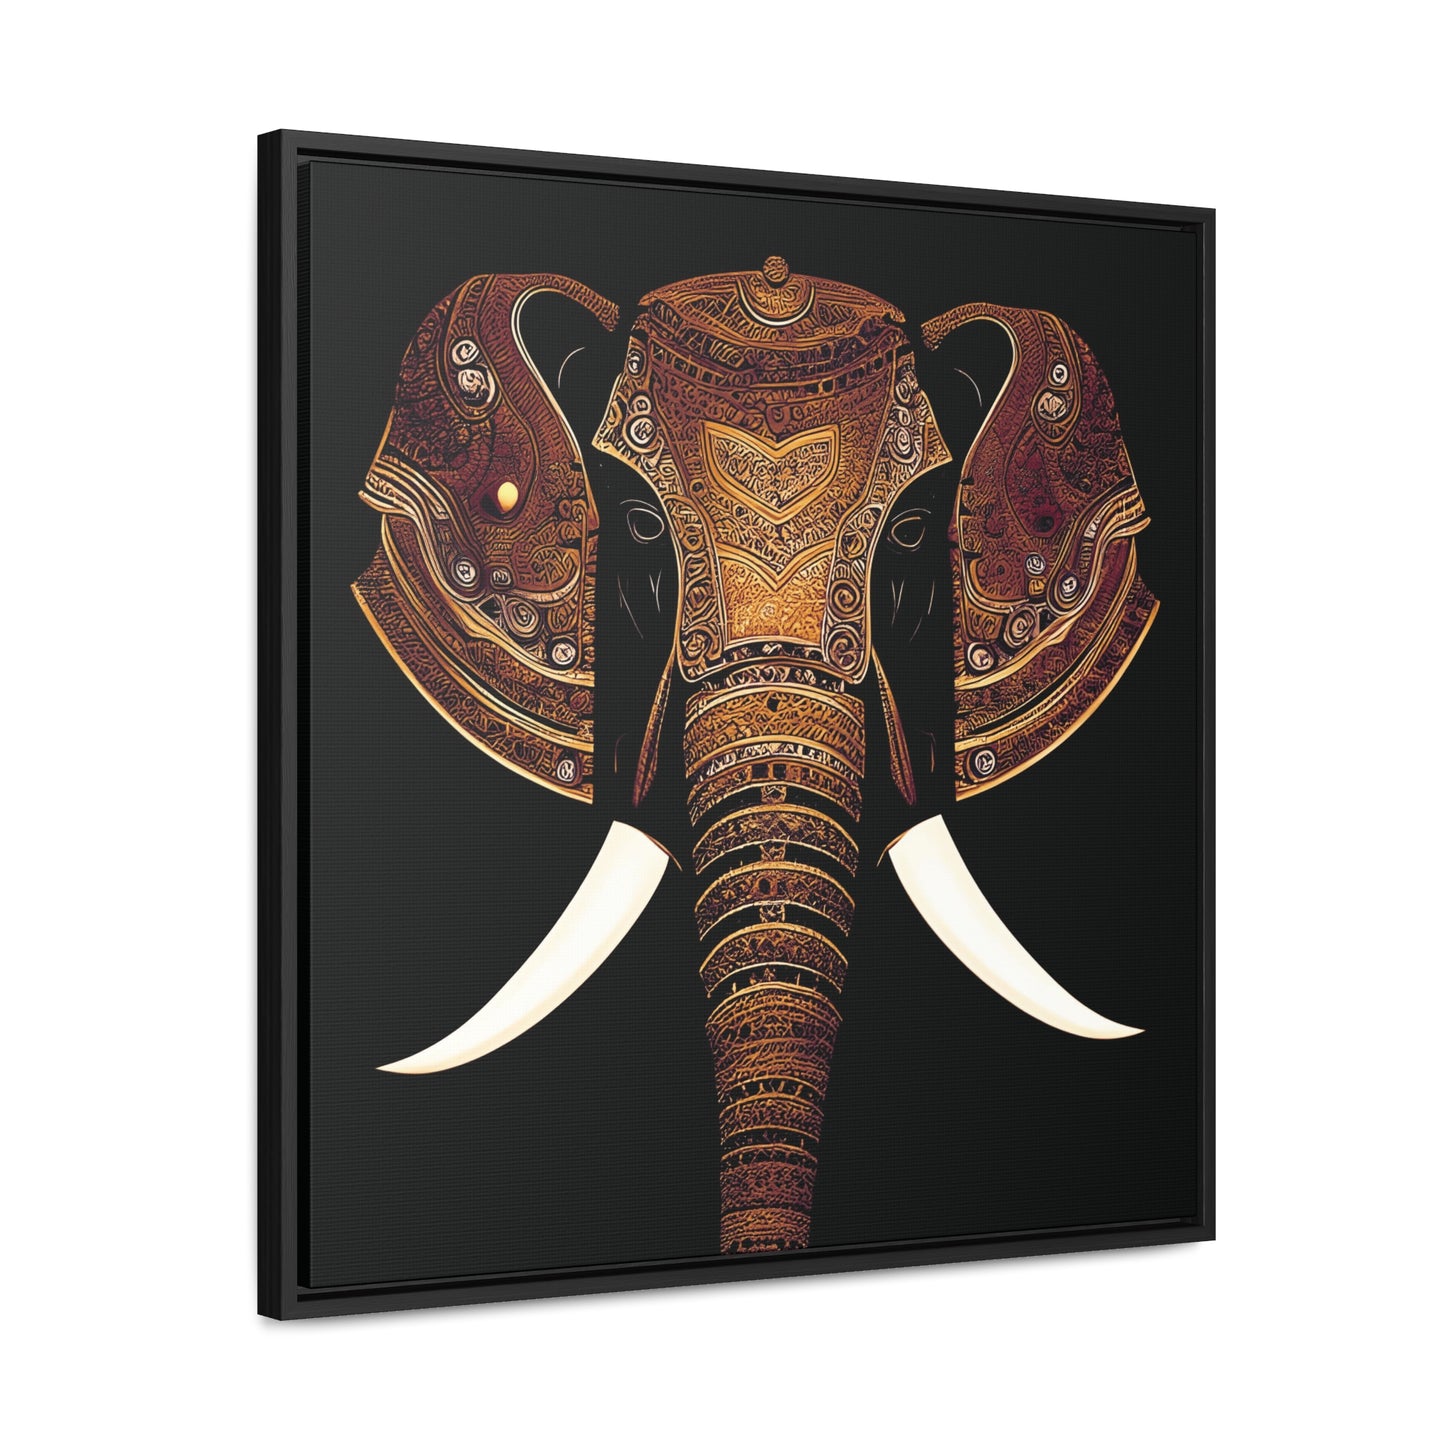 Elephant themed Wall Art Print - Indian Elephant Head With Parade Colors on Black Background Print on Canvas in a Floating Frame